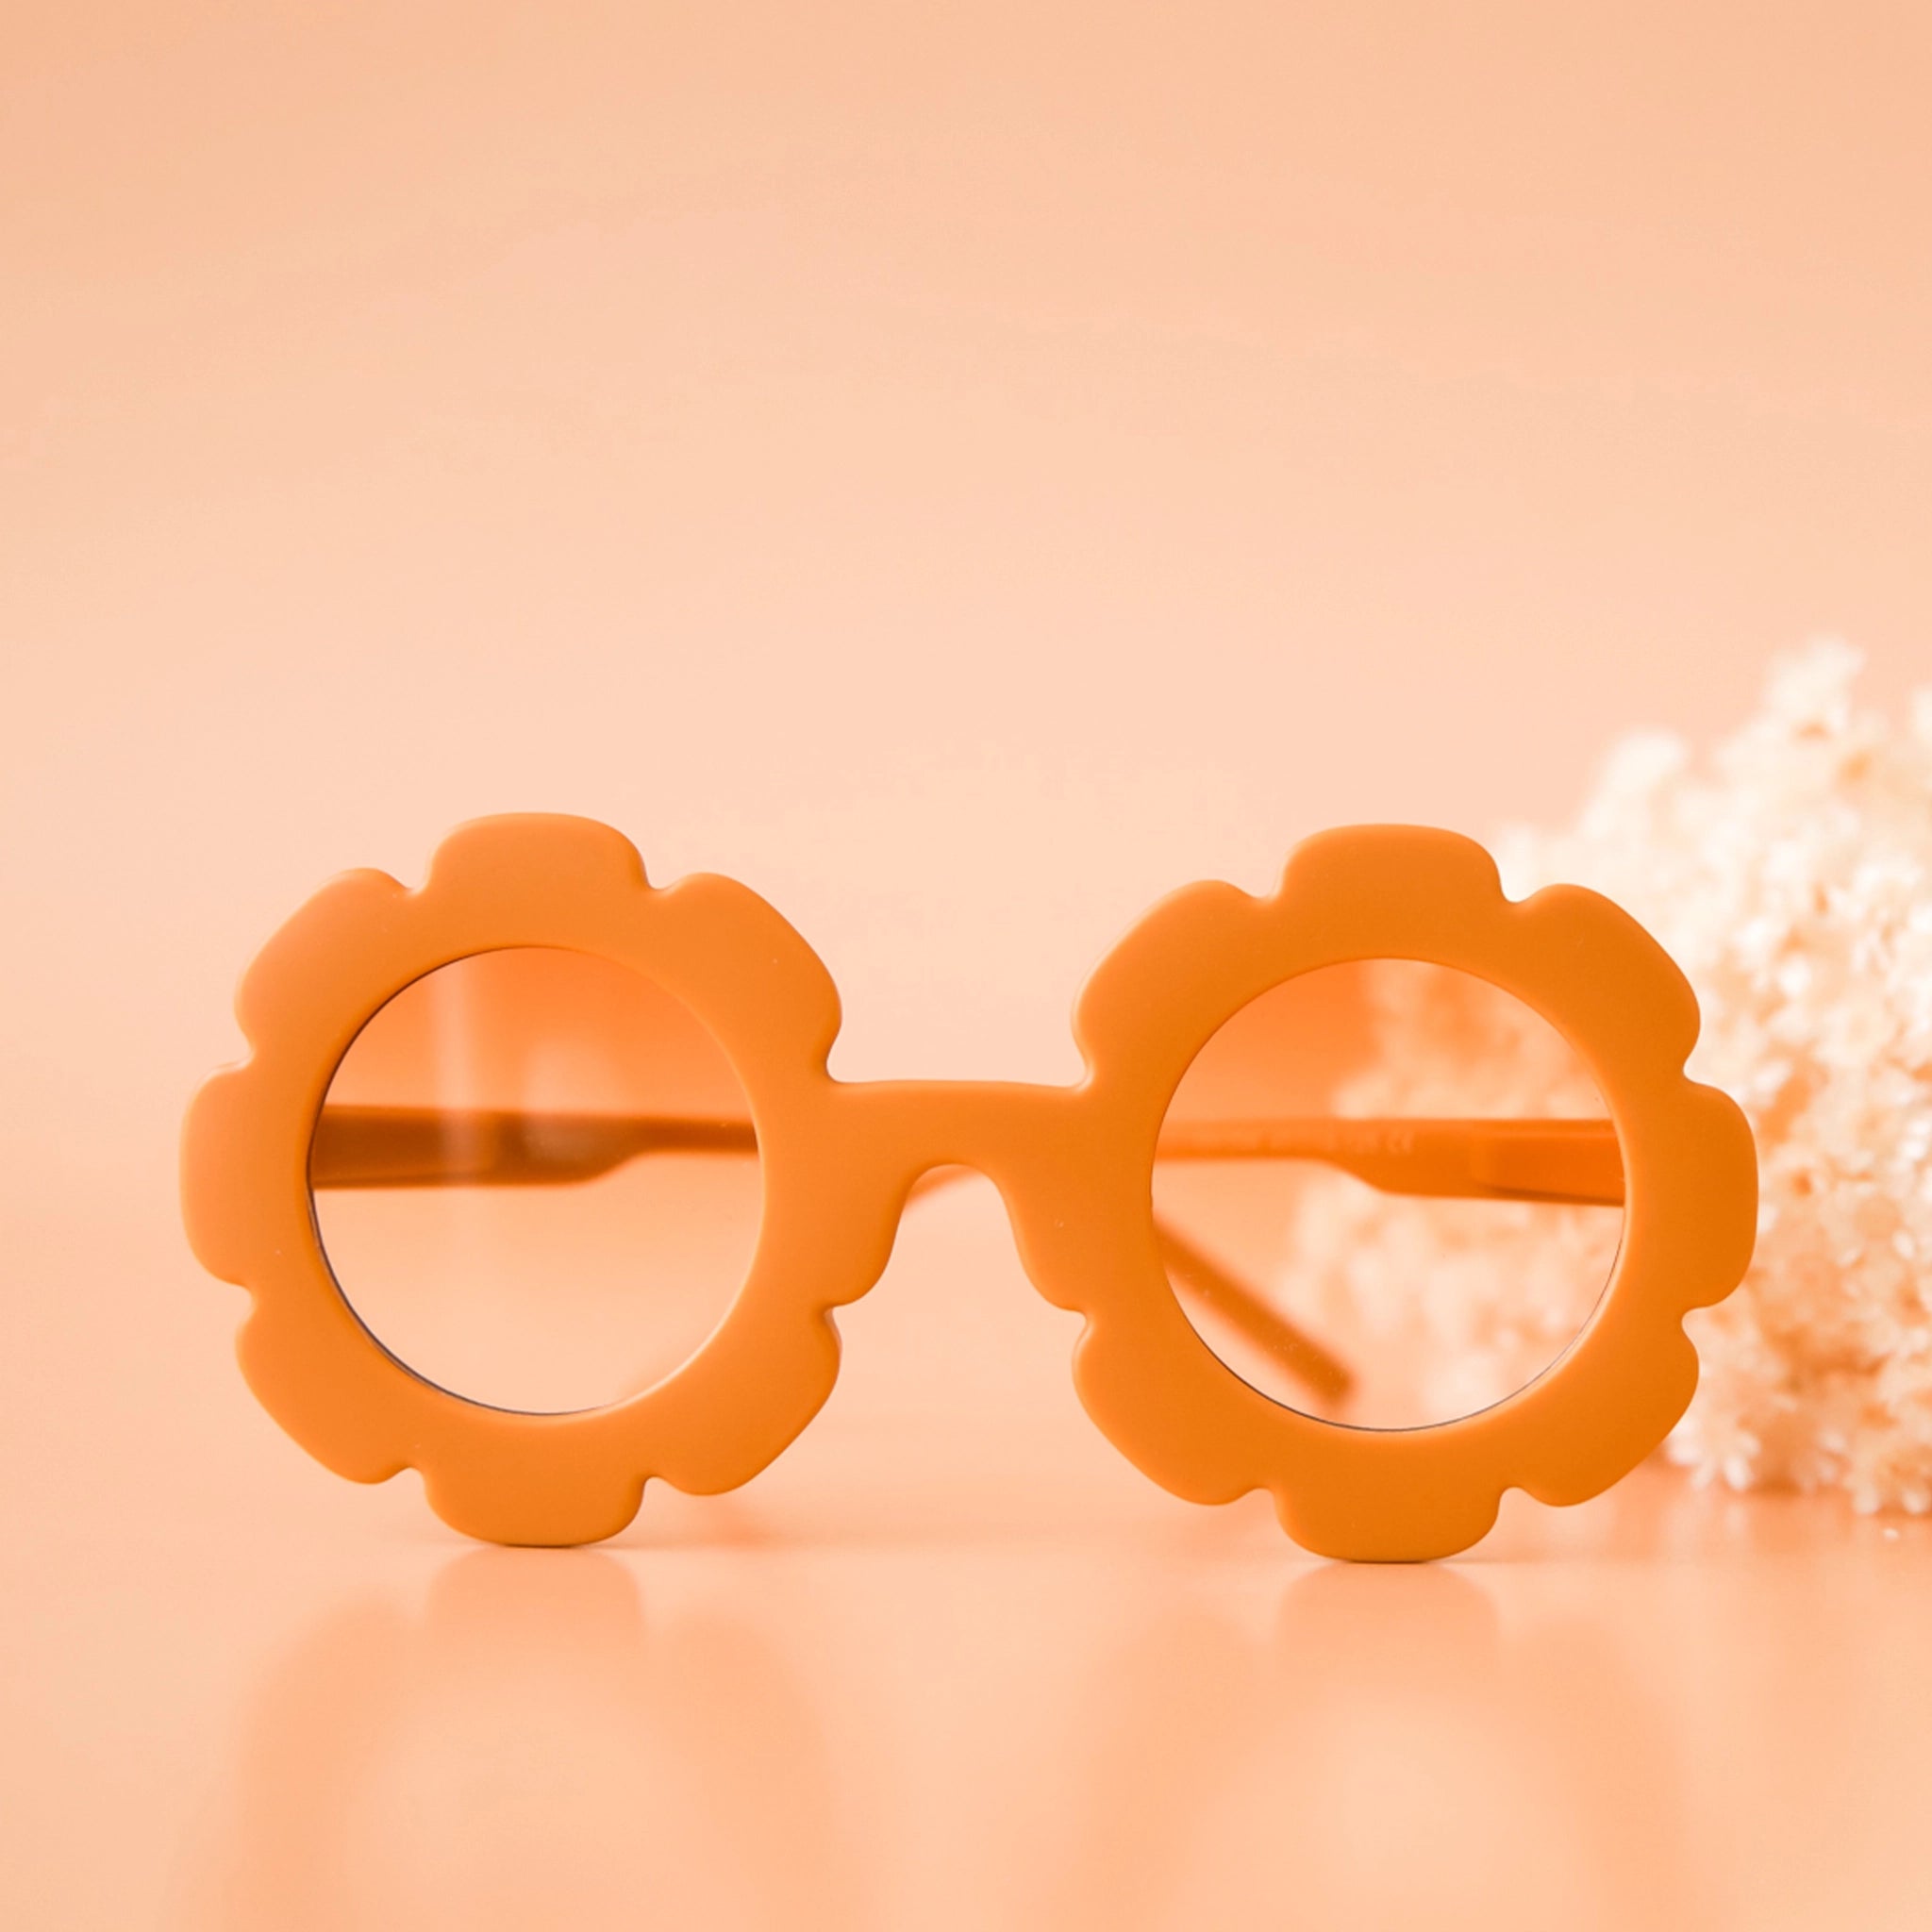 On a peachy background is an orange pair of flower shaped sunglasses with a light orange lens.